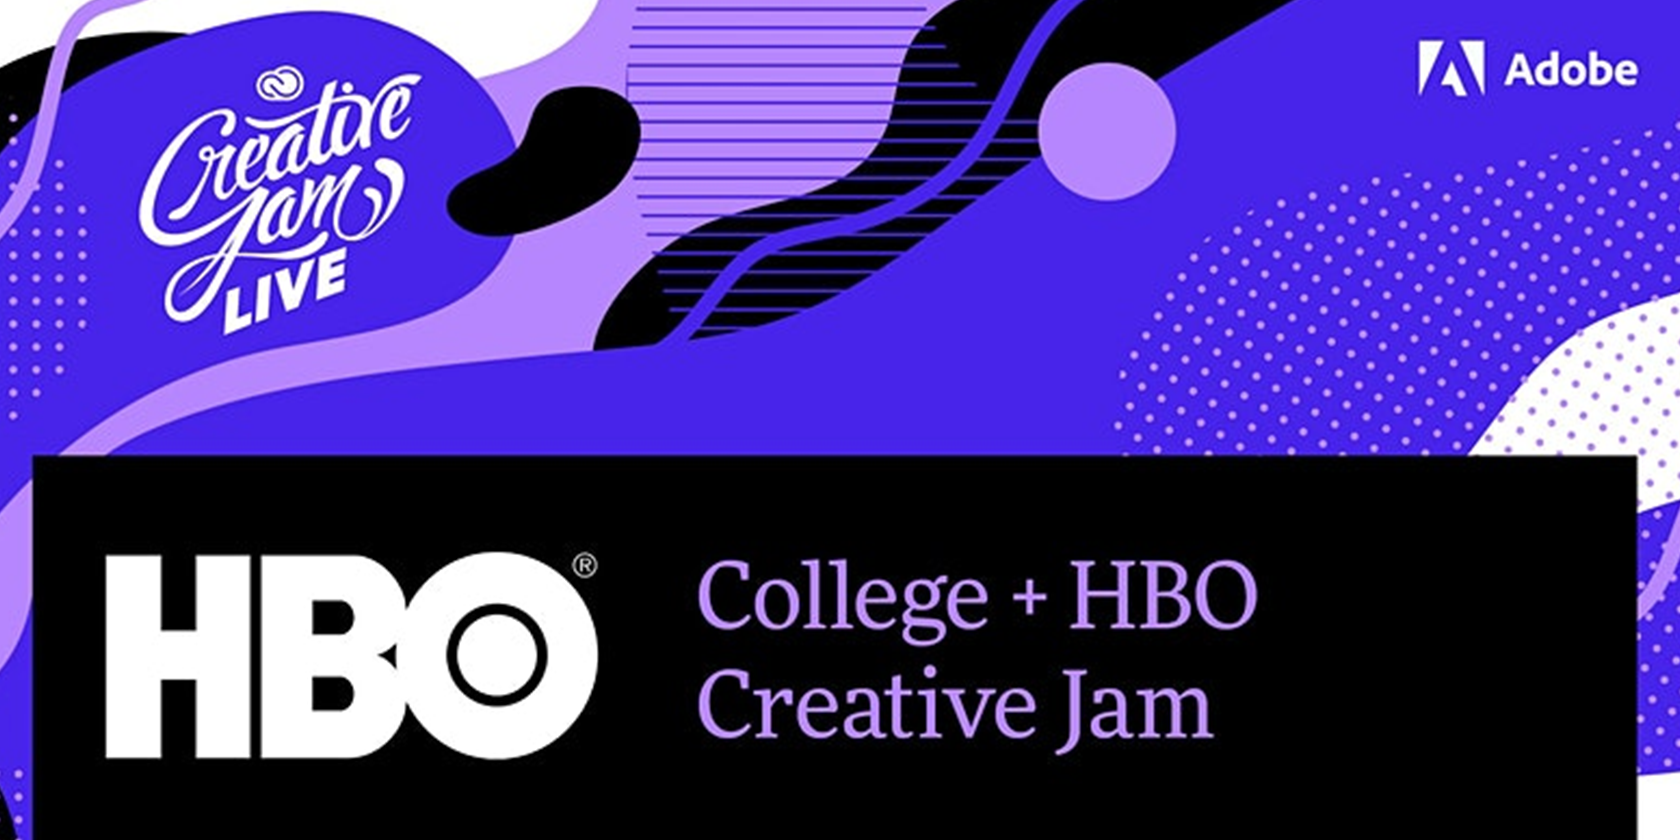 Graphic advertisement for College + HBO Creative Jam